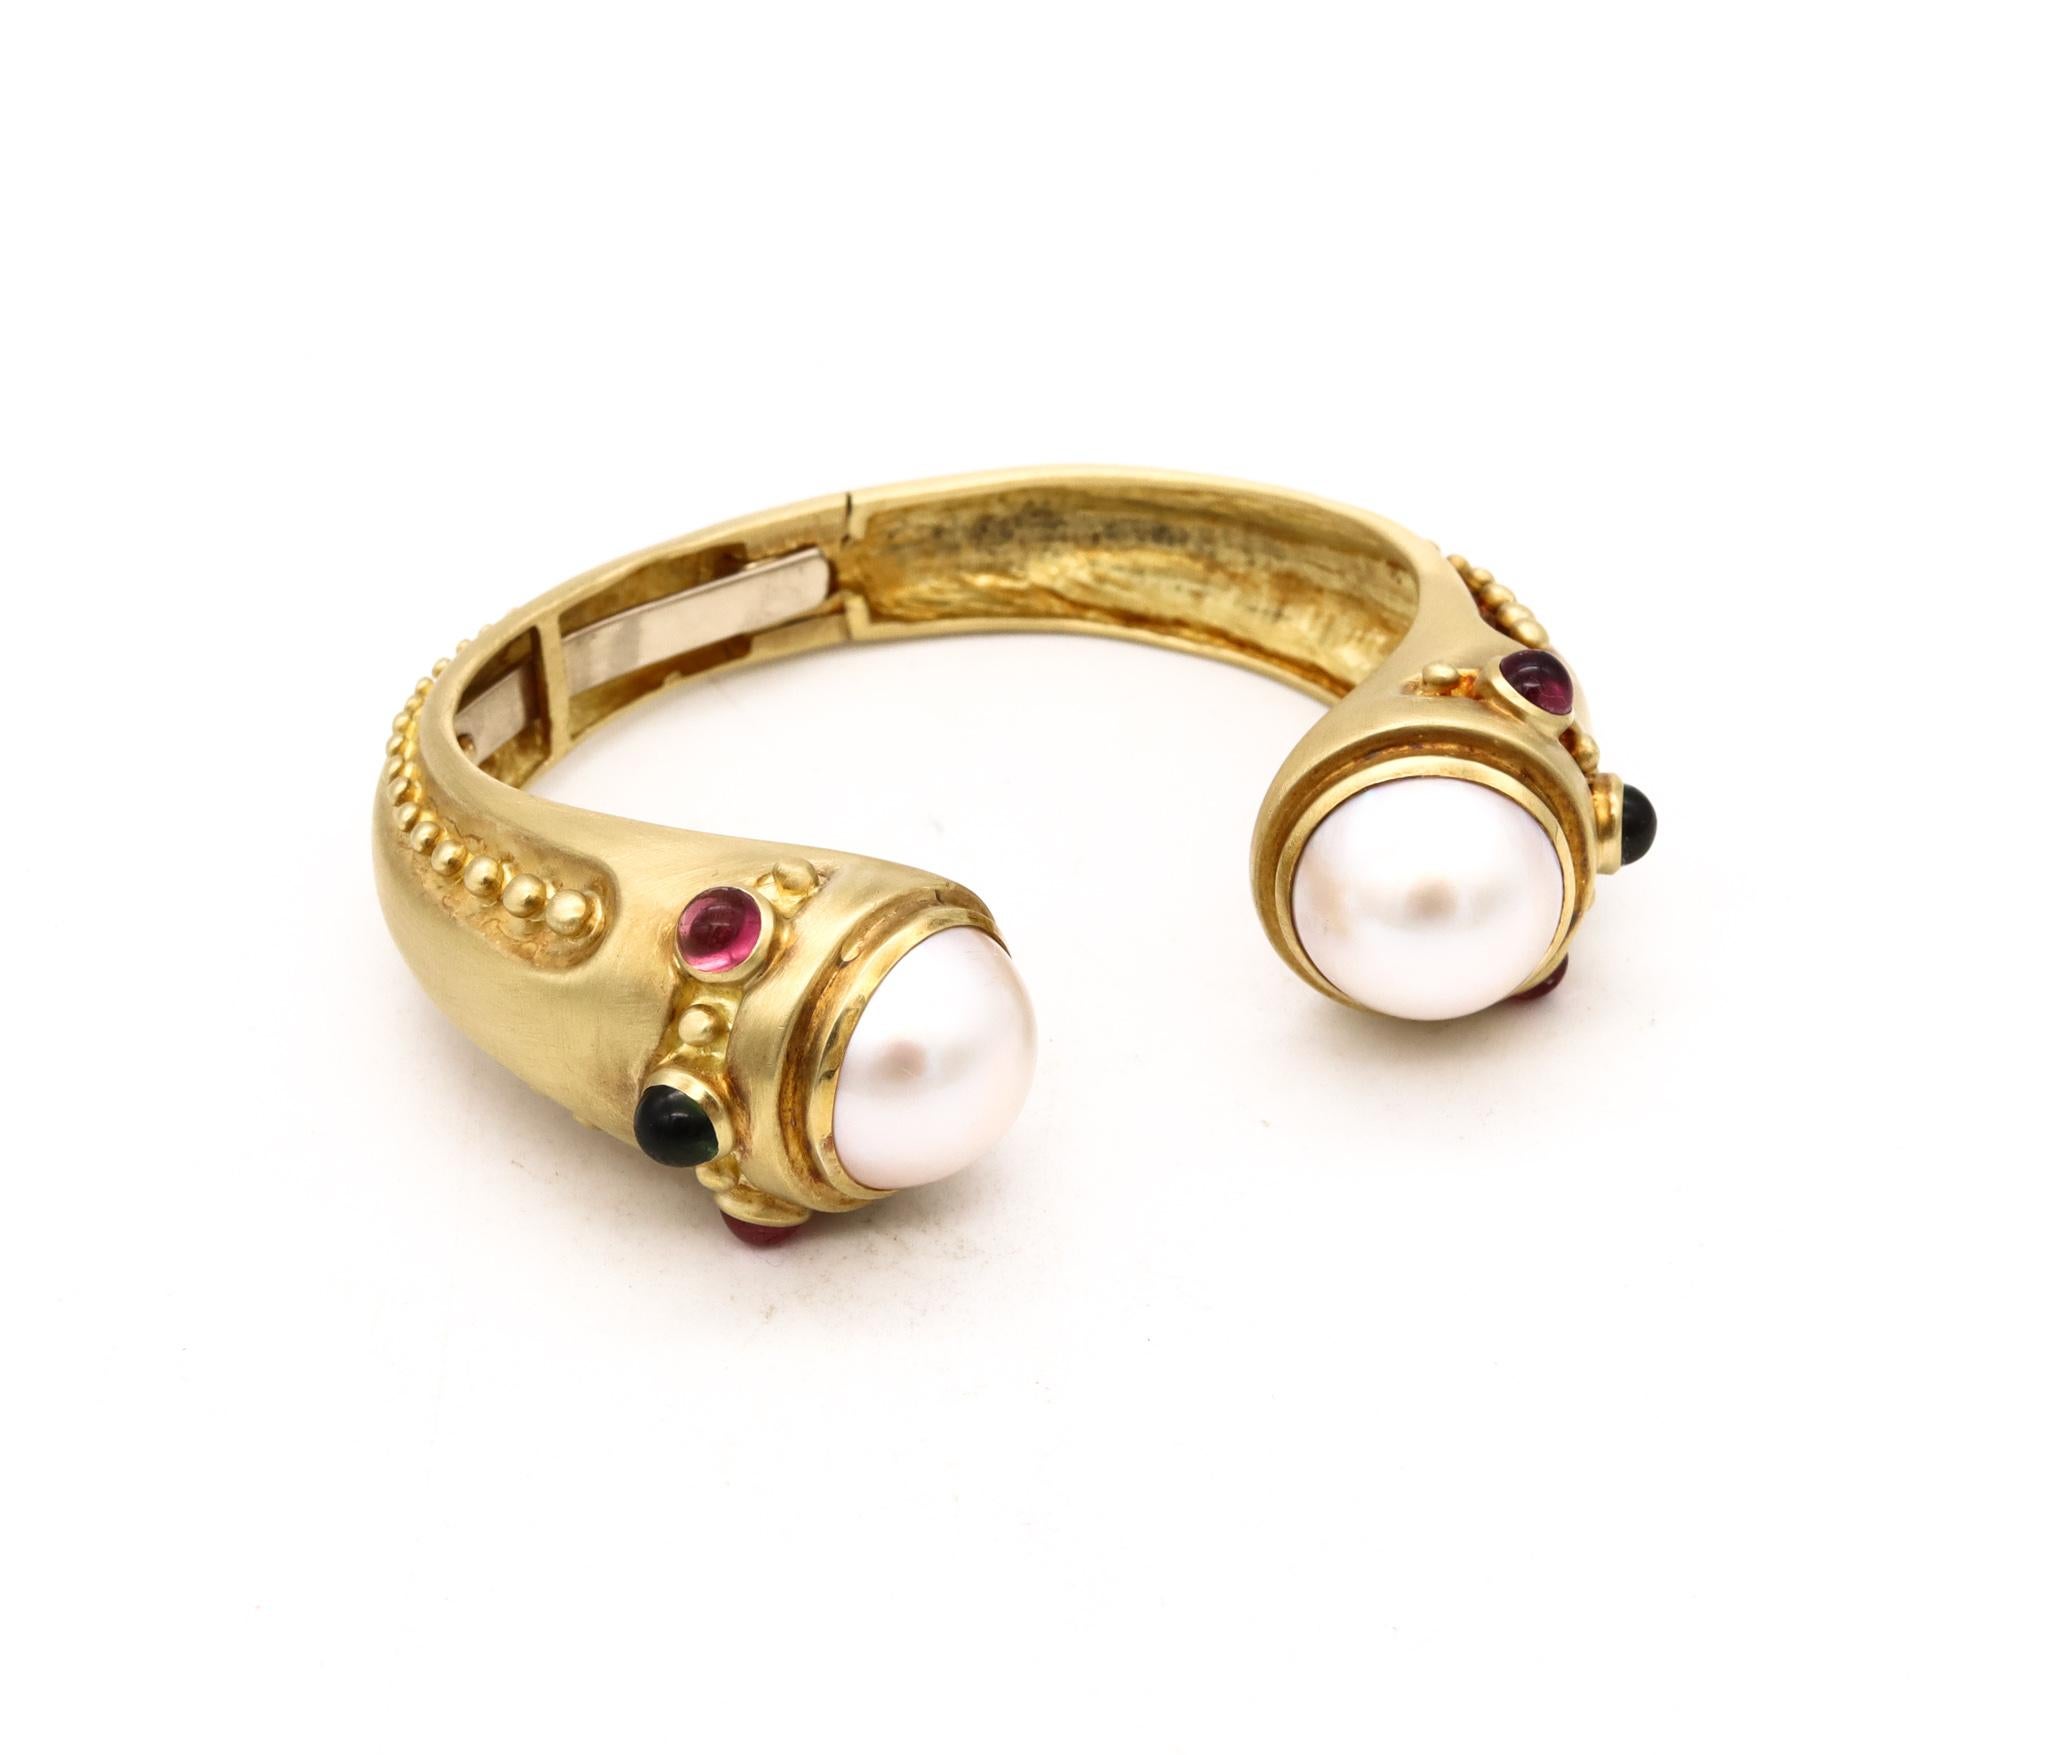 Marlene Stowe Cuff Bracelet in 18Kt Brushed Gold with Mabe Pearls and Tourmaline For Sale 4